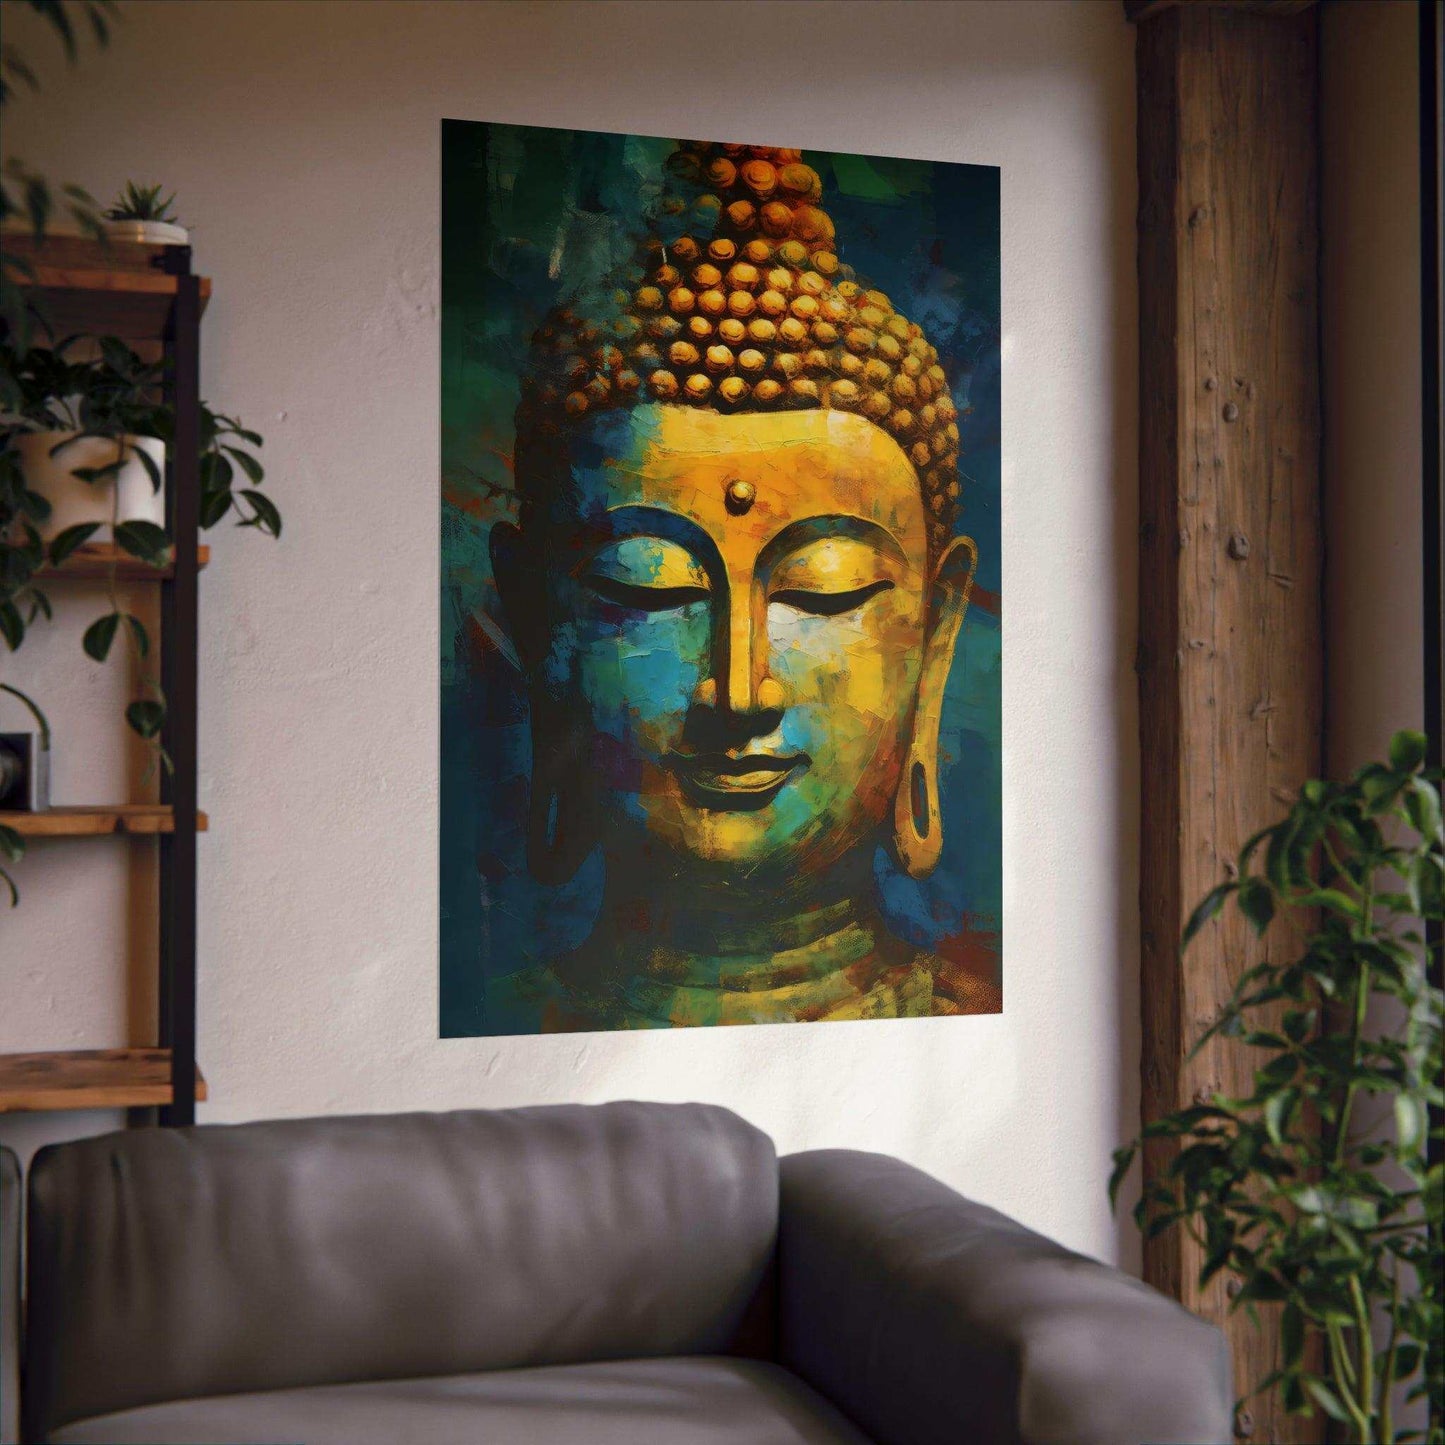 A vibrant Buddha portrait is featured against a cream wall, the artwork's golden and blue tones catching the ambient light. Below, a dark grey sofa invites relaxation, and to the side, a wooden bookshelf with green plants brings a touch of nature indoors, creating a peaceful and meditative space.